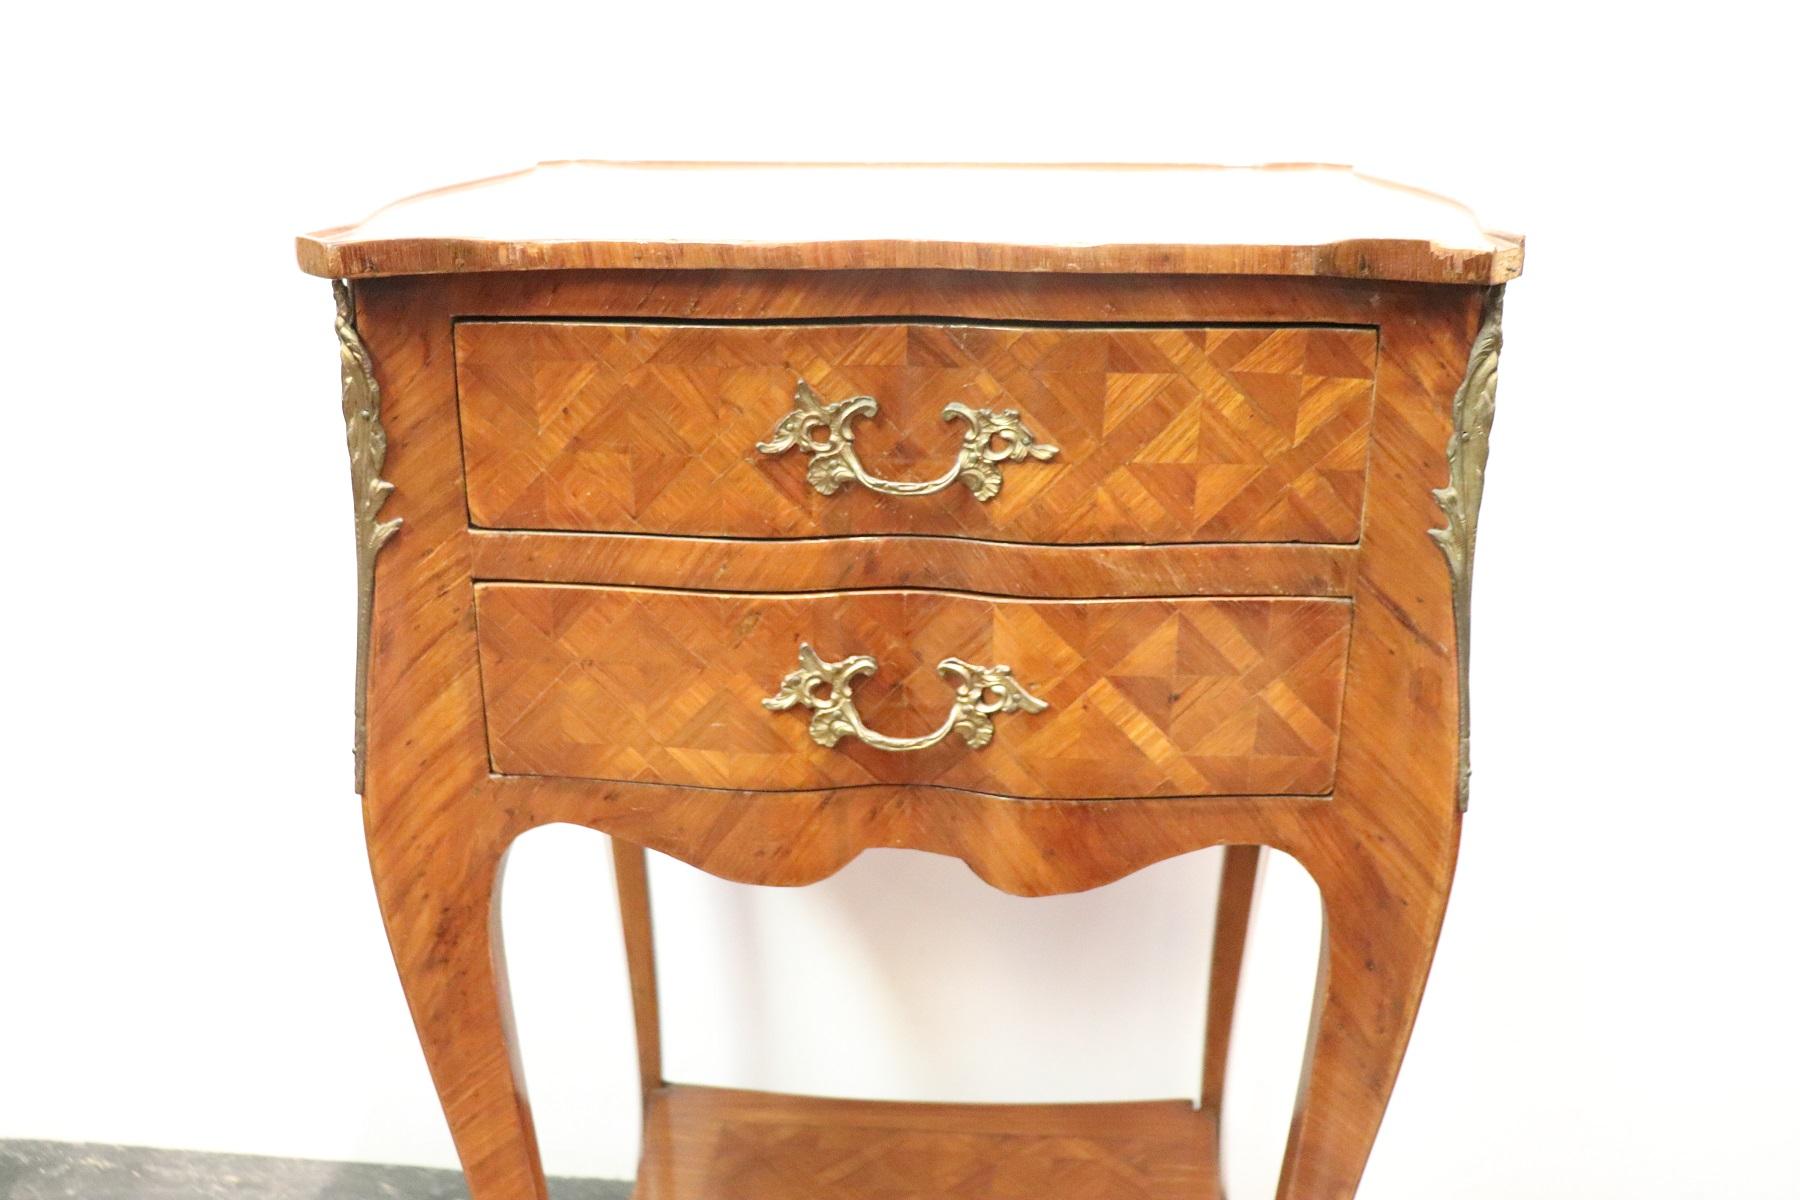 20th Century Italian Louis XV Style Marquetry Wood Side Table or Nightstand (Marketerie)